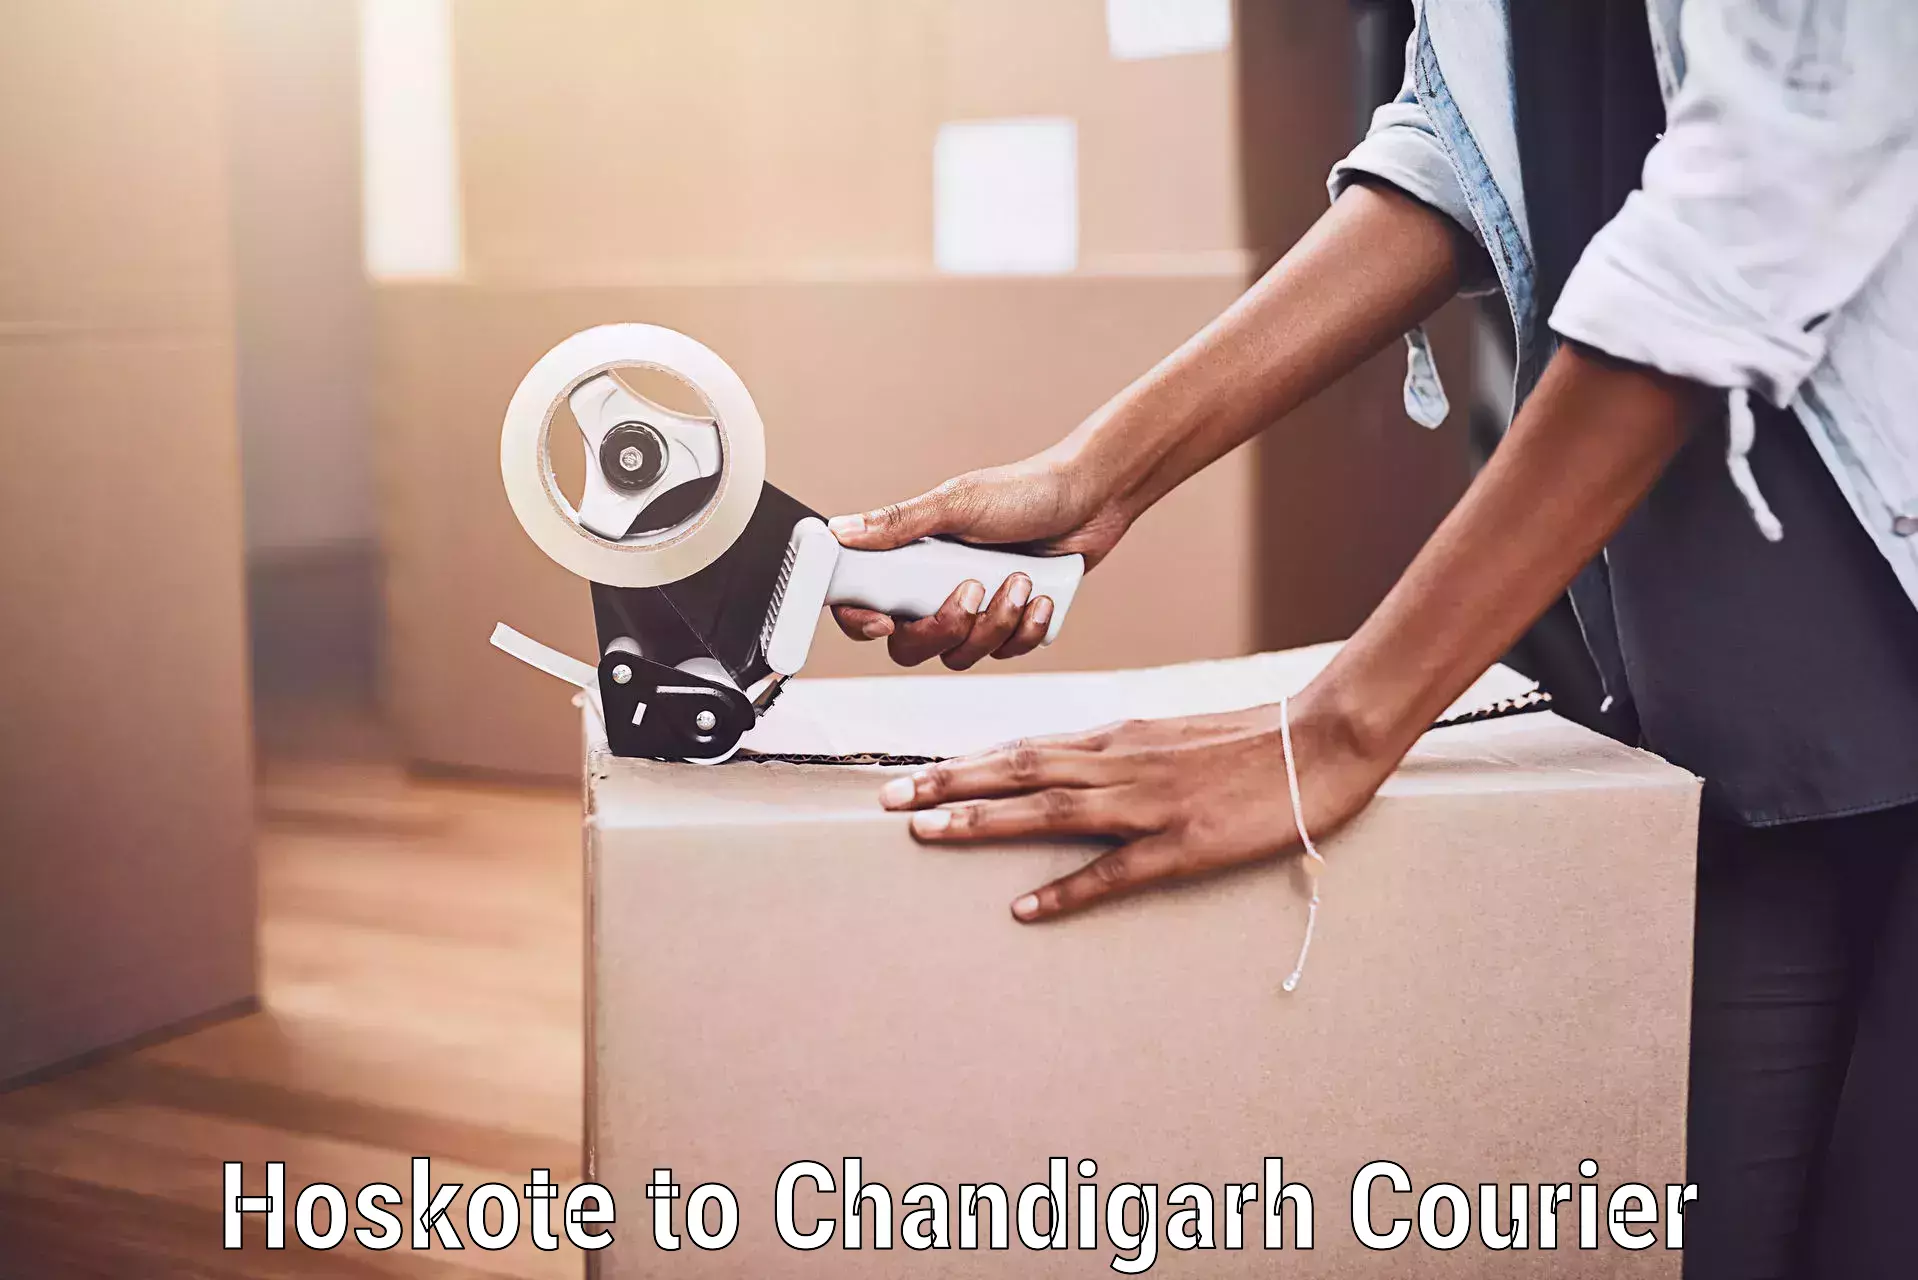 Instant baggage transport quote Hoskote to Chandigarh